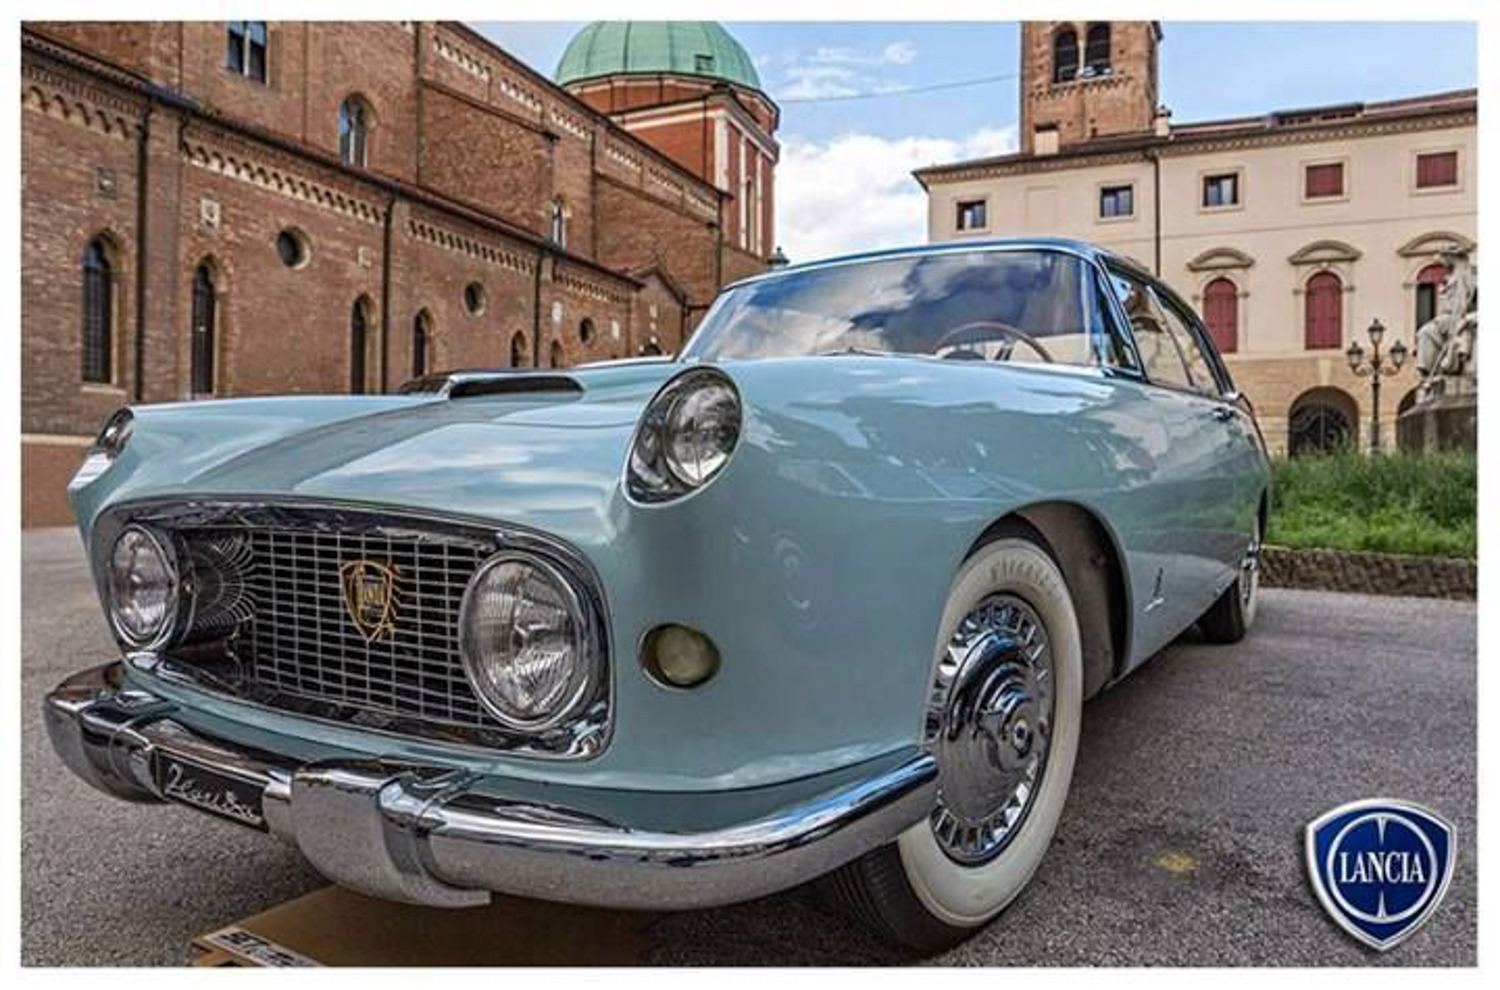 Another Interesting Lancia done by Farina was the Aurelia "Florida" car. 